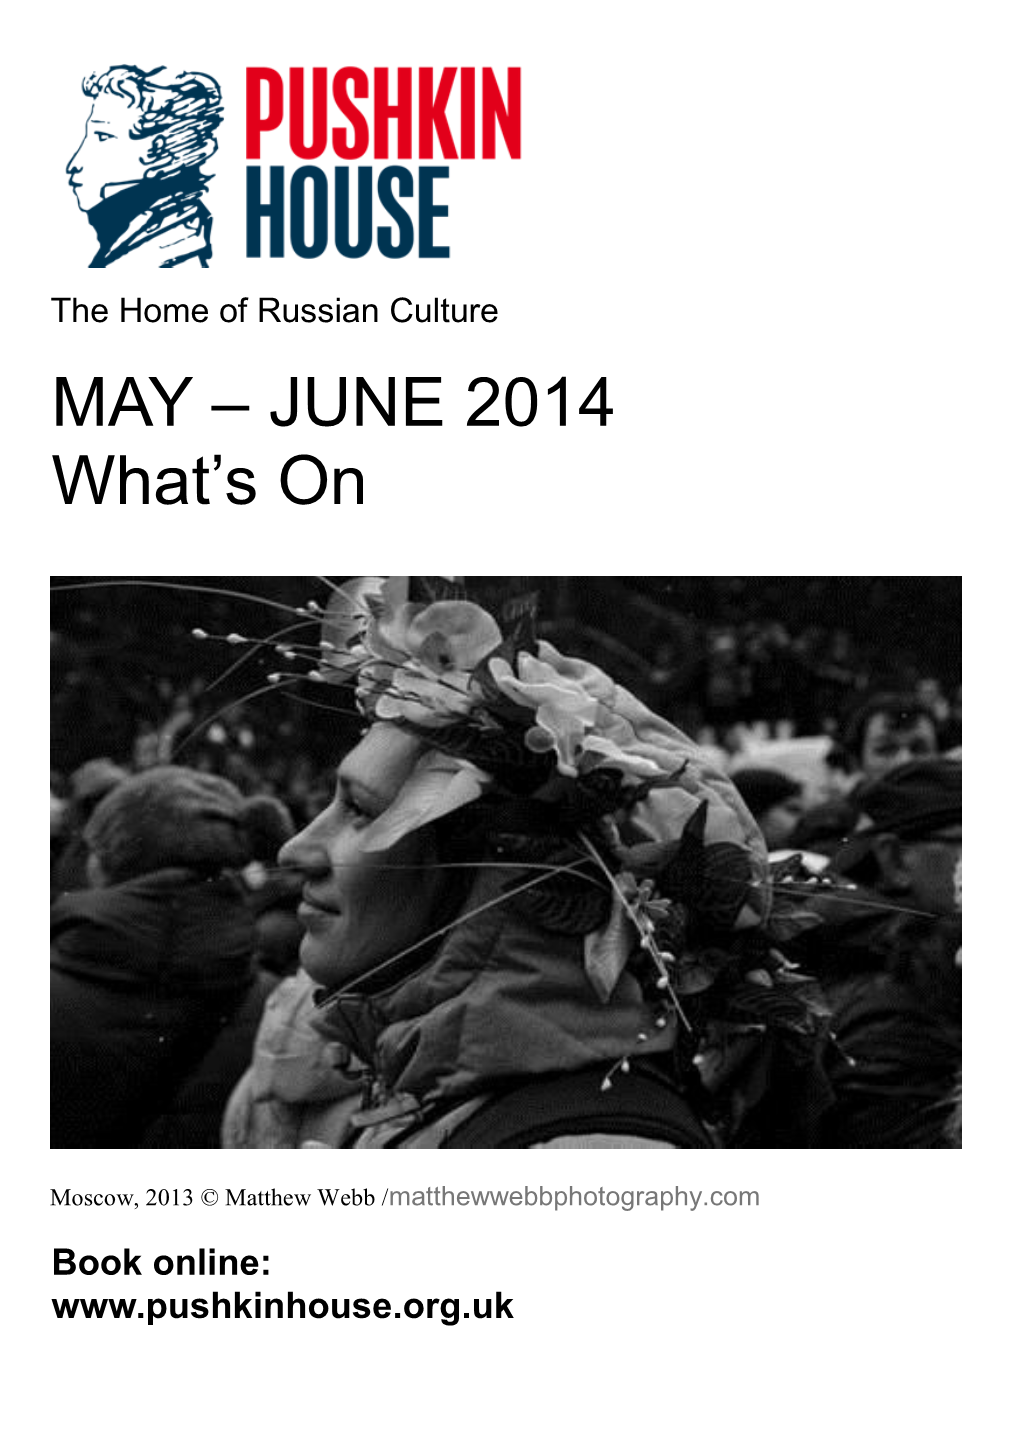 MAY – JUNE 2014 What's On